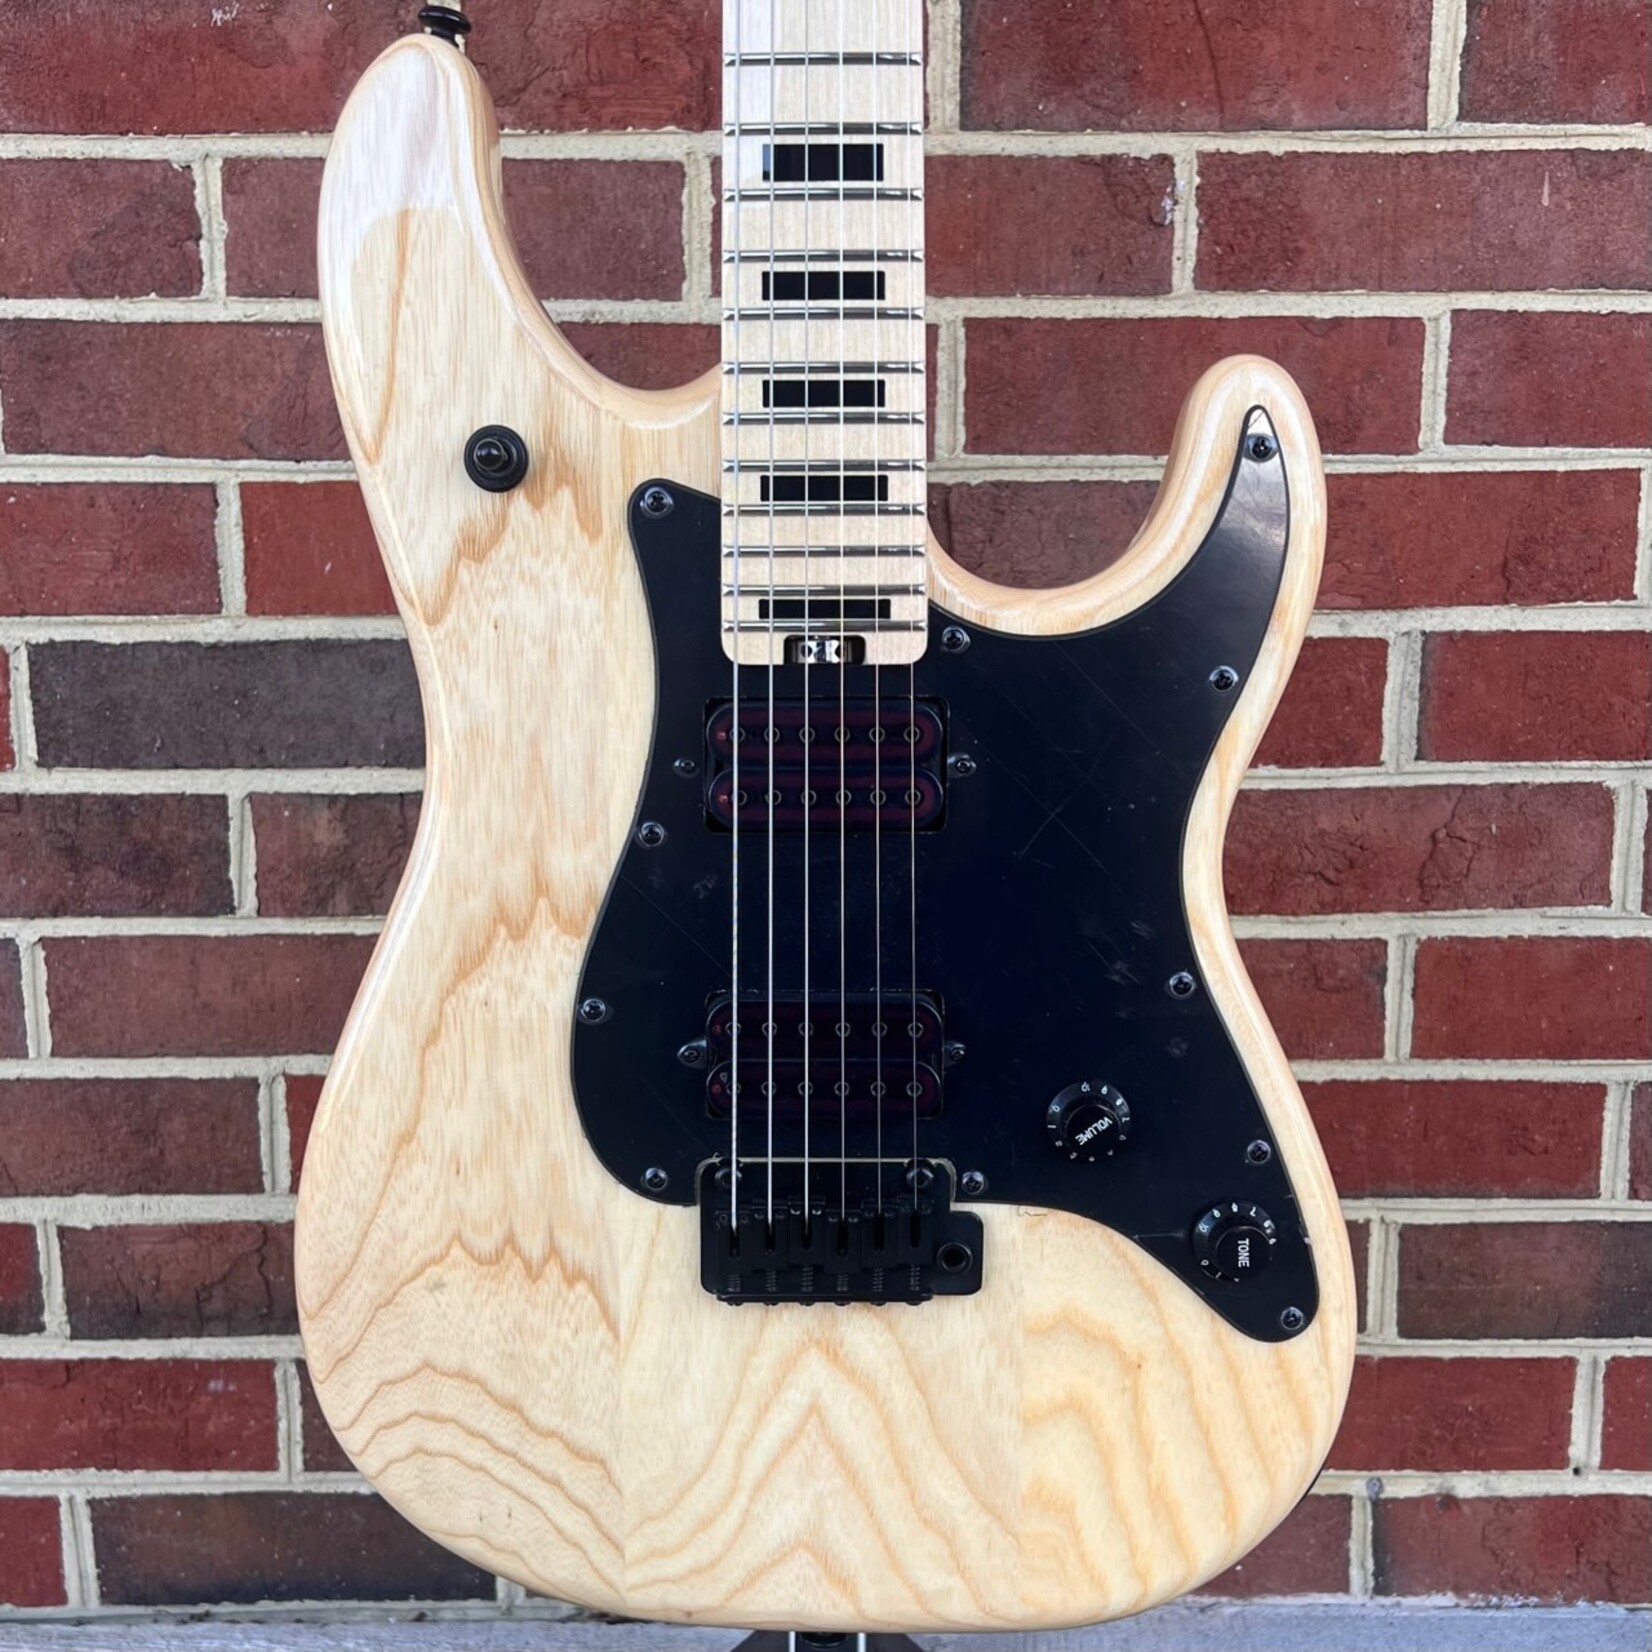 Schecter Guitar Research Schecter Justin Beck Ani, Gloss Natural, Swamp Ash Body, Maple Neck & Fretboard, Block Inlays, D'Addario Auto-Trim Locking Tuners, SN# IW23020384